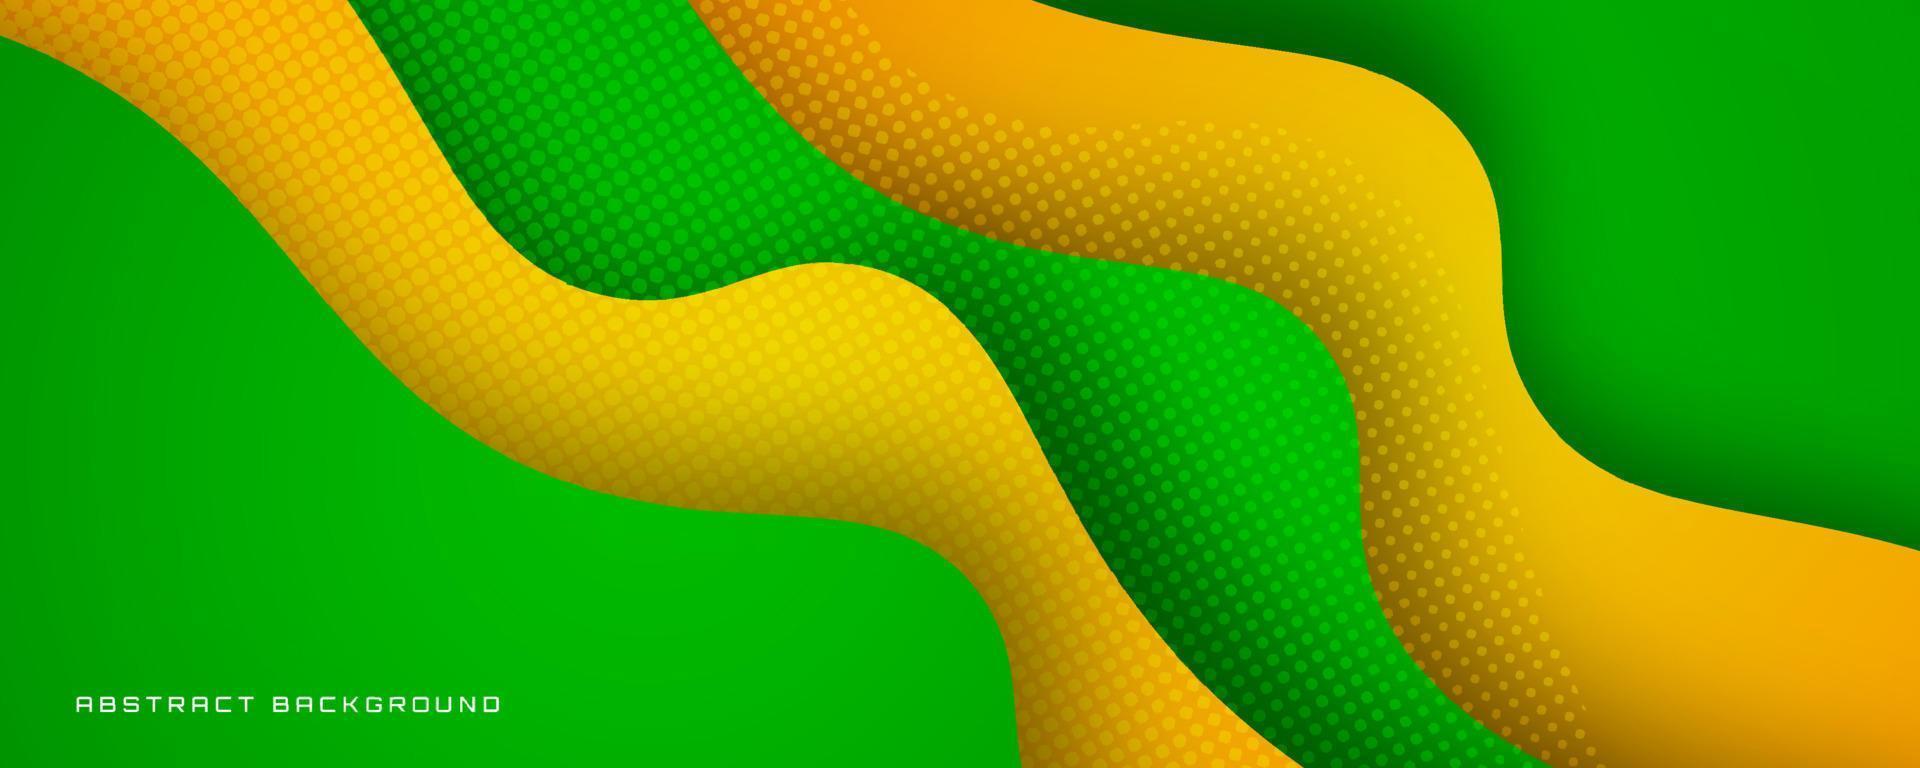 3D green yellow geometric abstract background overlap layer on bright space with colorful waves decoration. Graphic design element wavy style concept for banner, flyer, card, or brochure cover vector